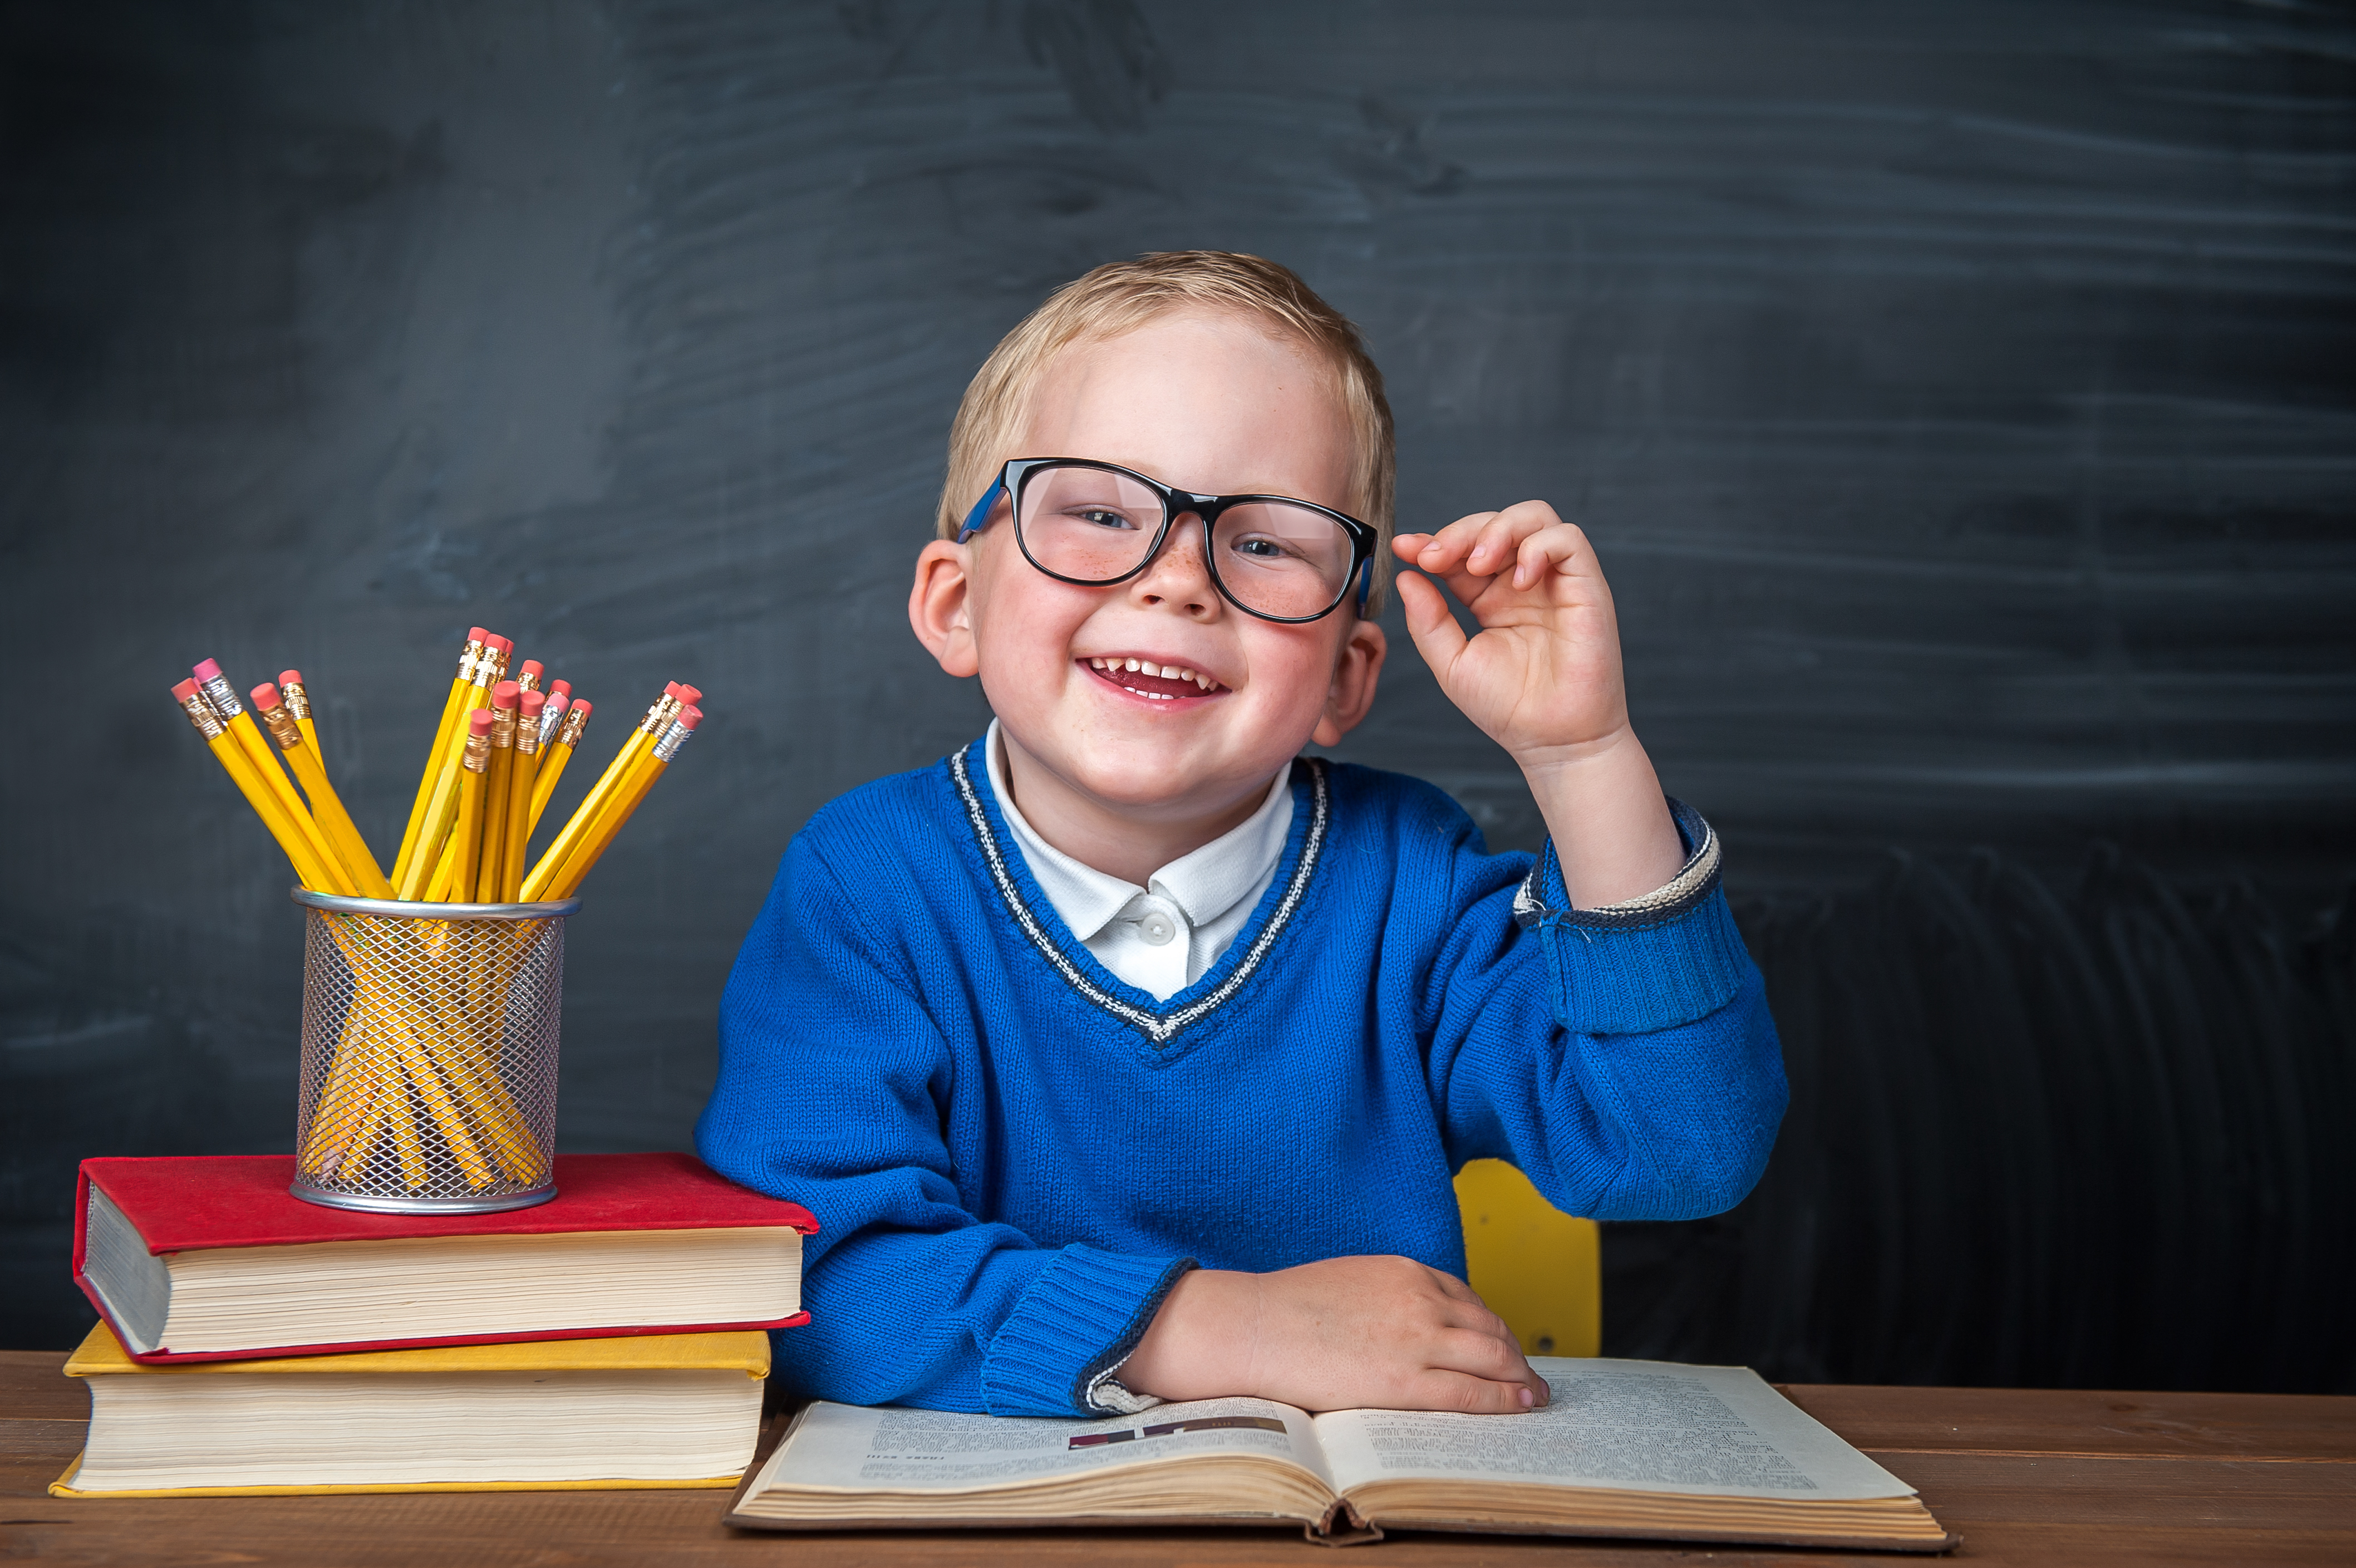 boy touching his glasses sitting at a desk with large books and container of pencils